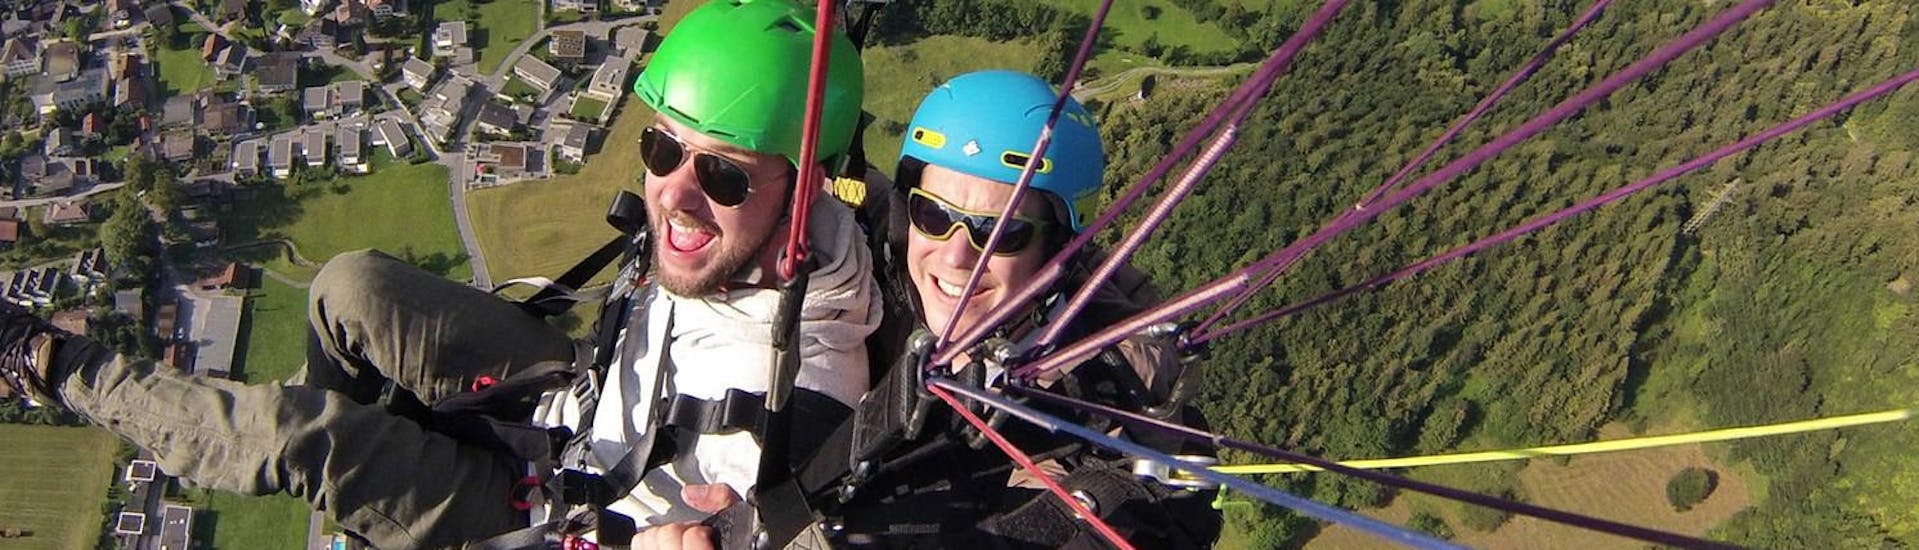 Tandem Paragliding in the Glarnerland &amp; Walensee - Couples with Robair Gleitschirmschule Saint-Gall - Hero image